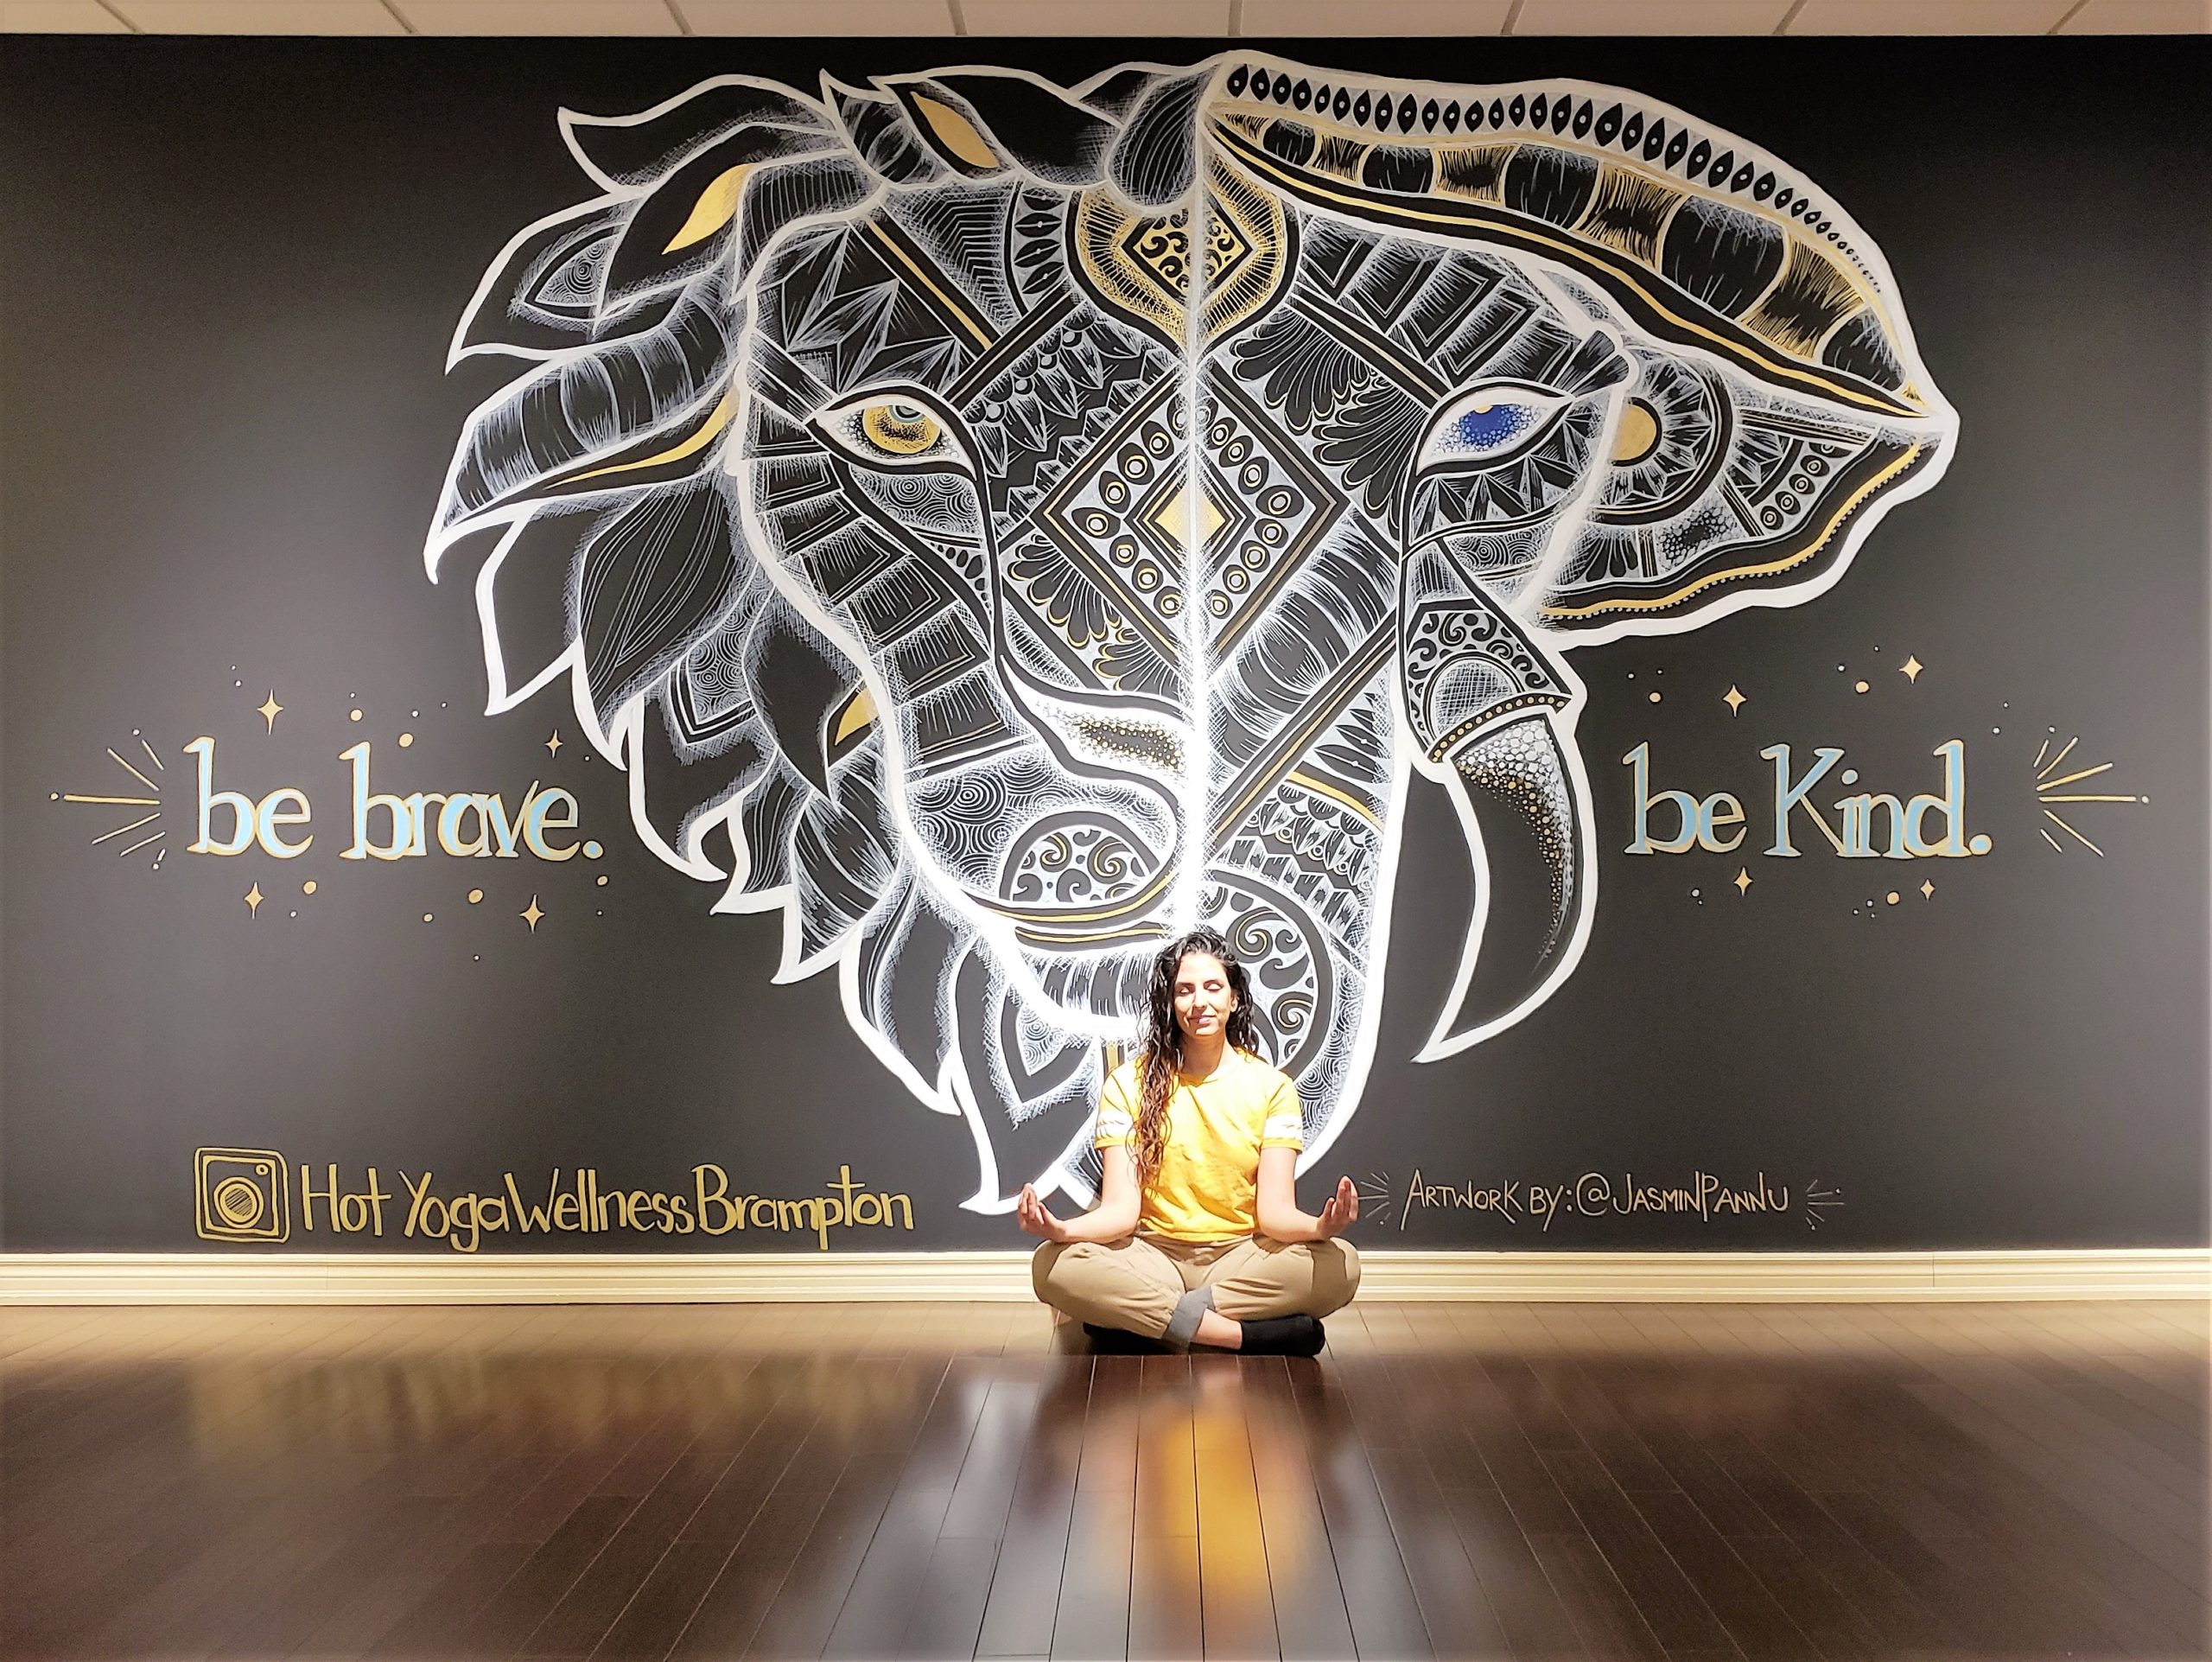 Jasmin Pannu and the business wall art she created for a yoga studio